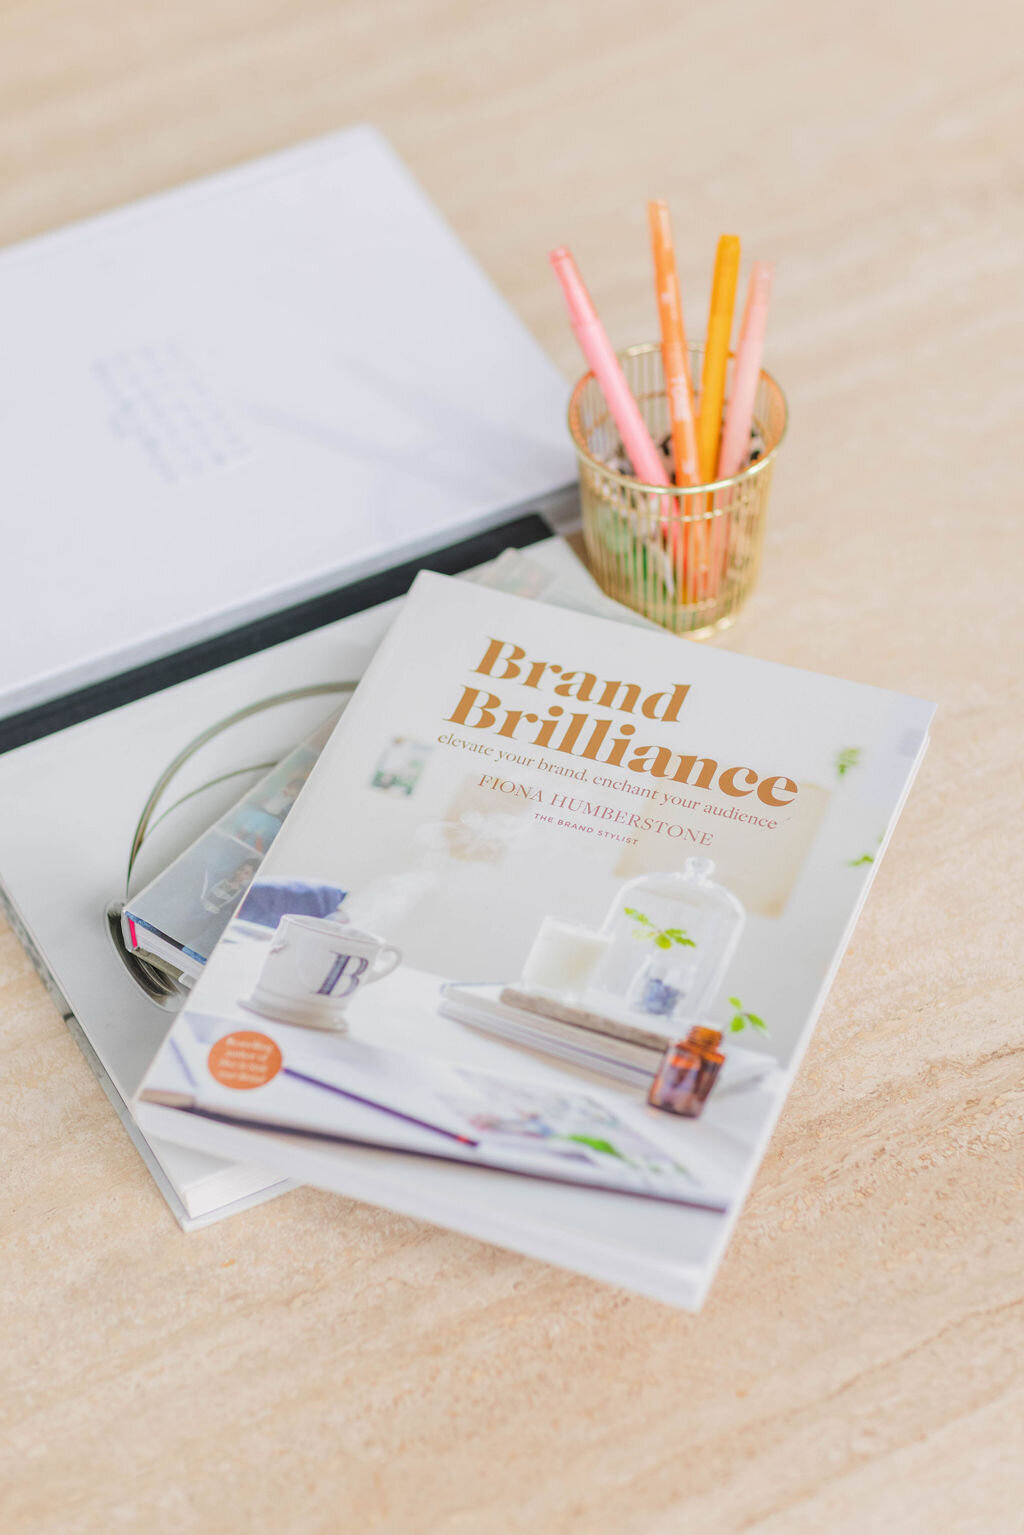 close up of the book brand brillance on a coffee table